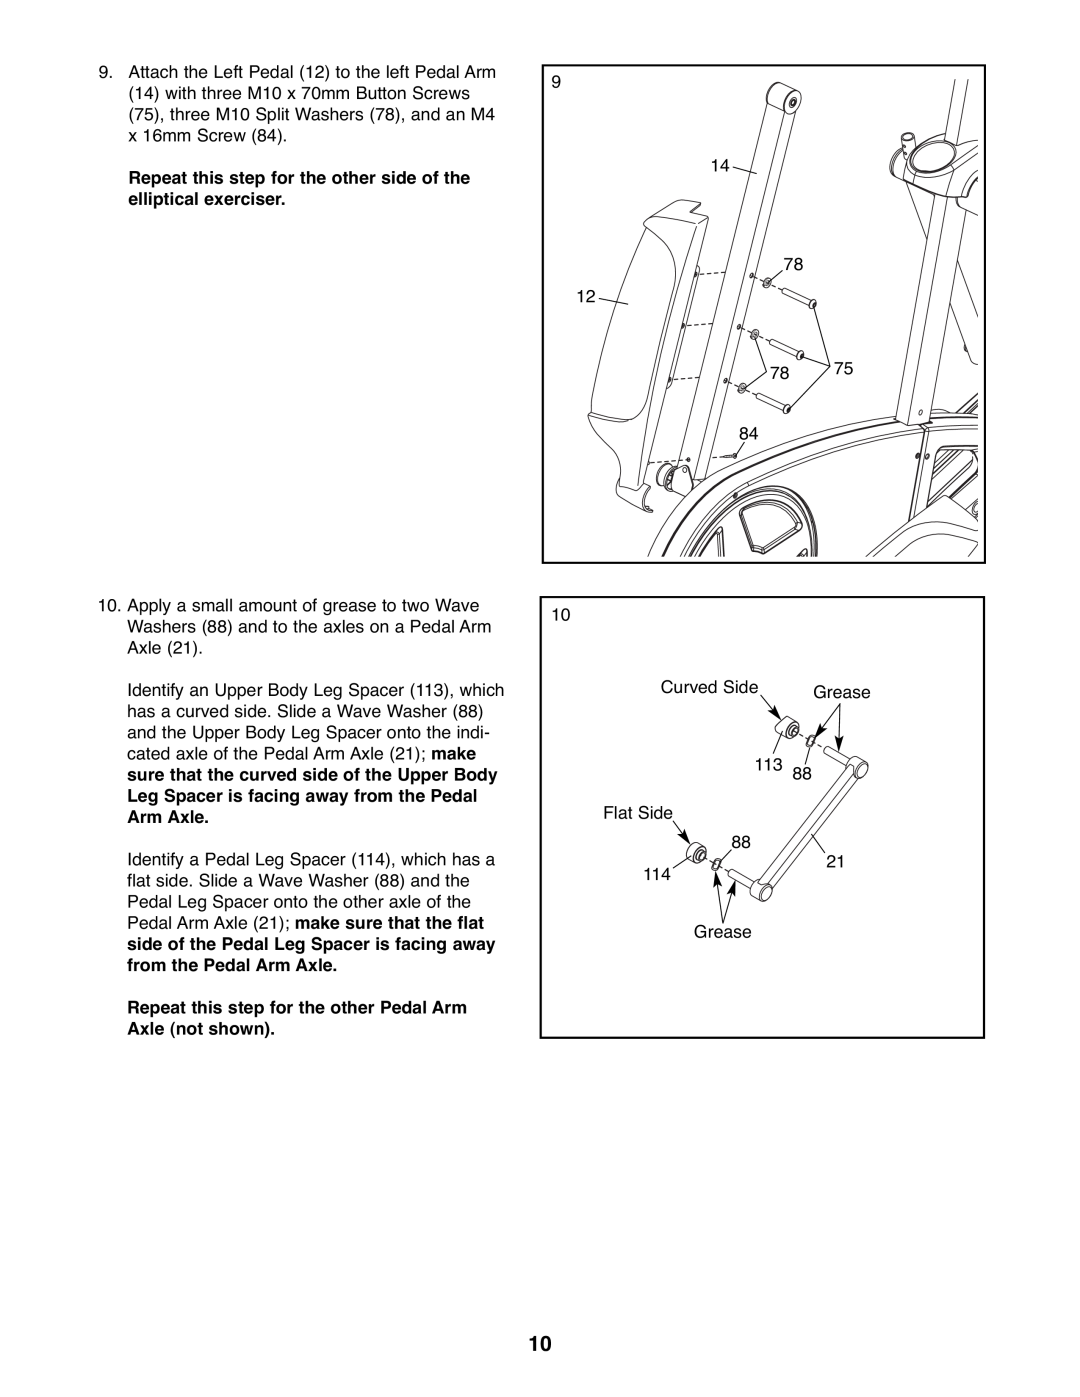 ProForm 831.23744.0 user manual Repeat this step for the other side of the elliptical exerciser 